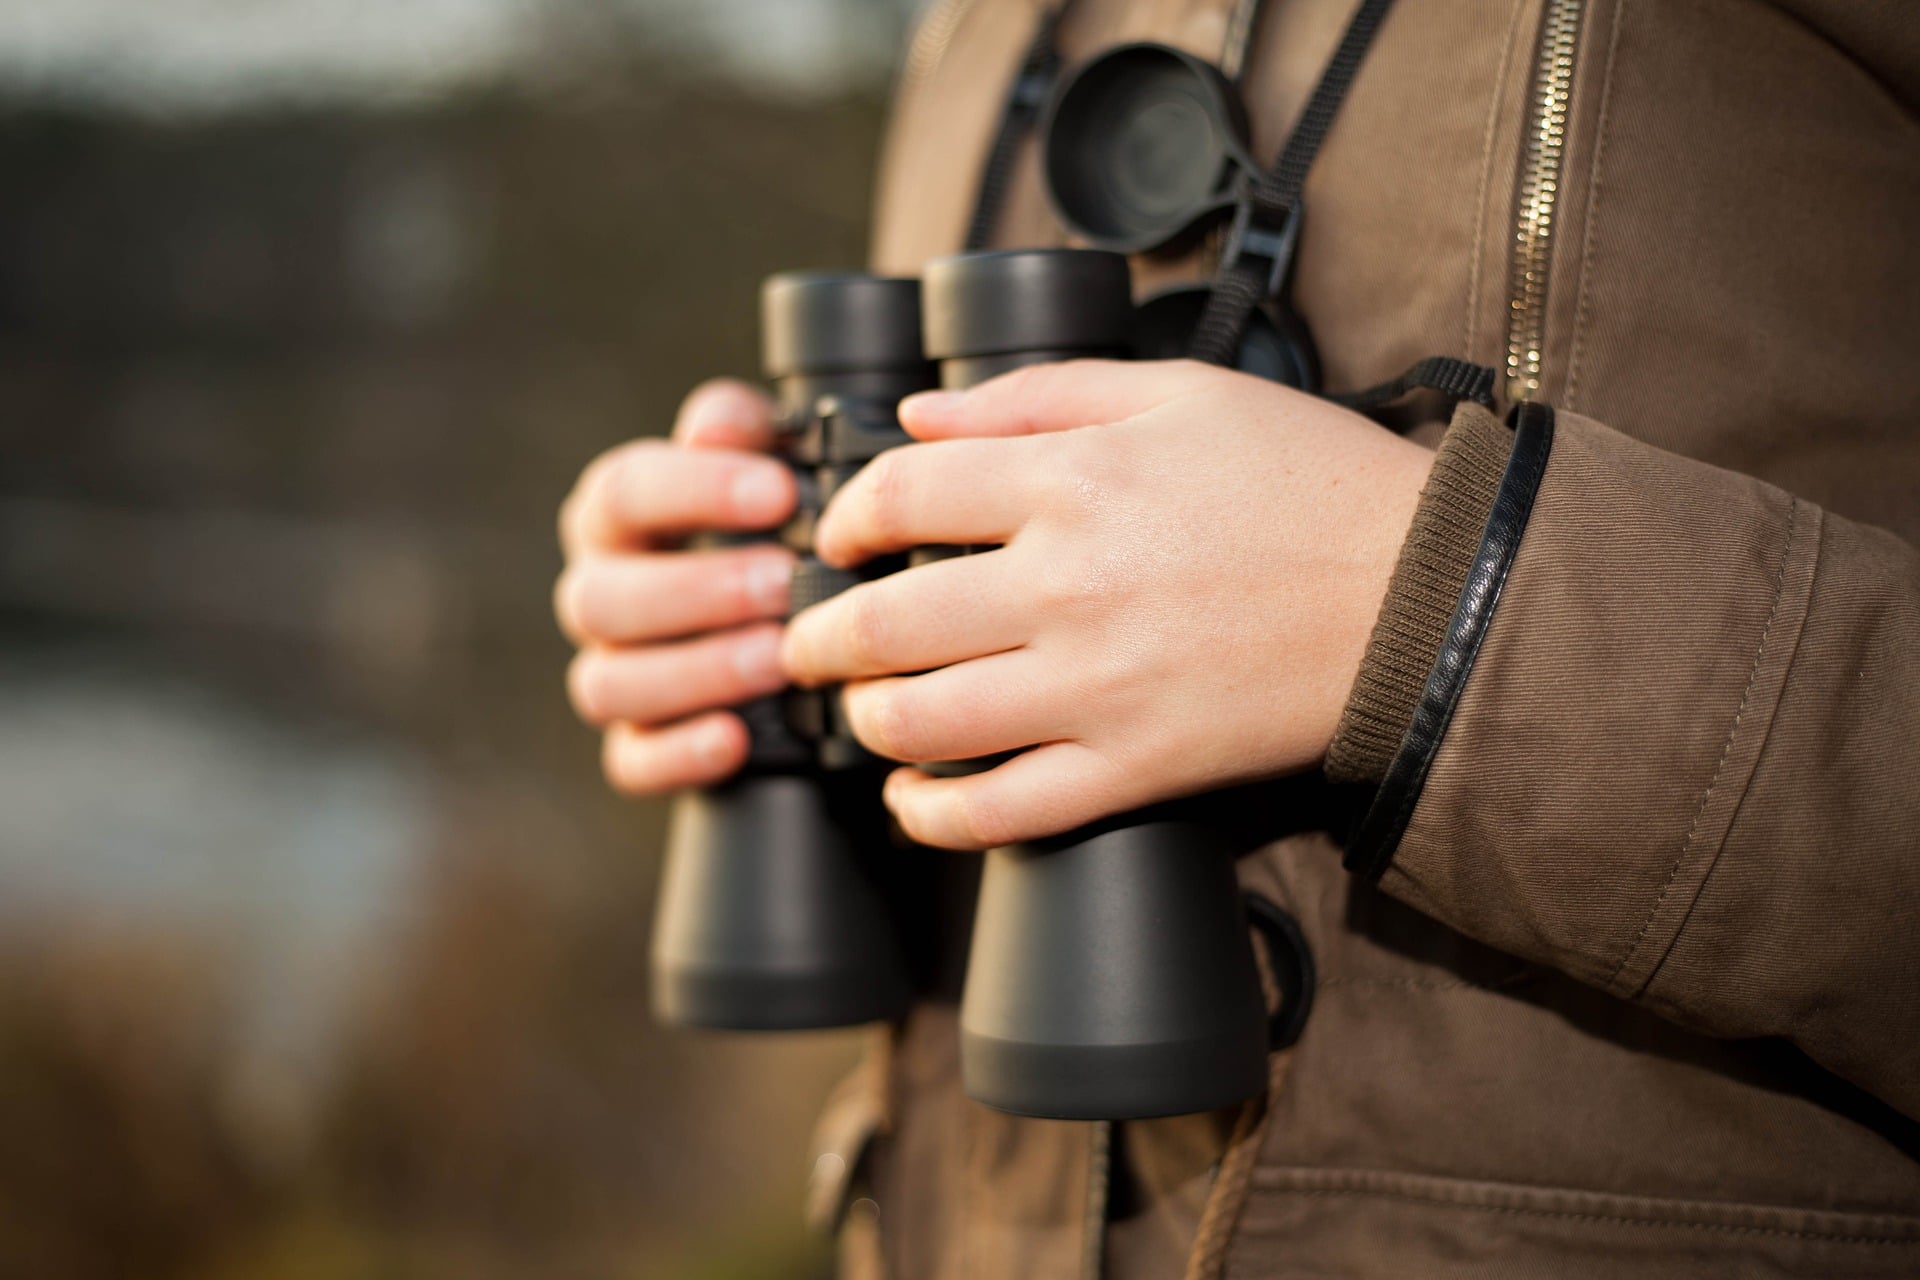 A person wearing a brown jacket holding black binoculars